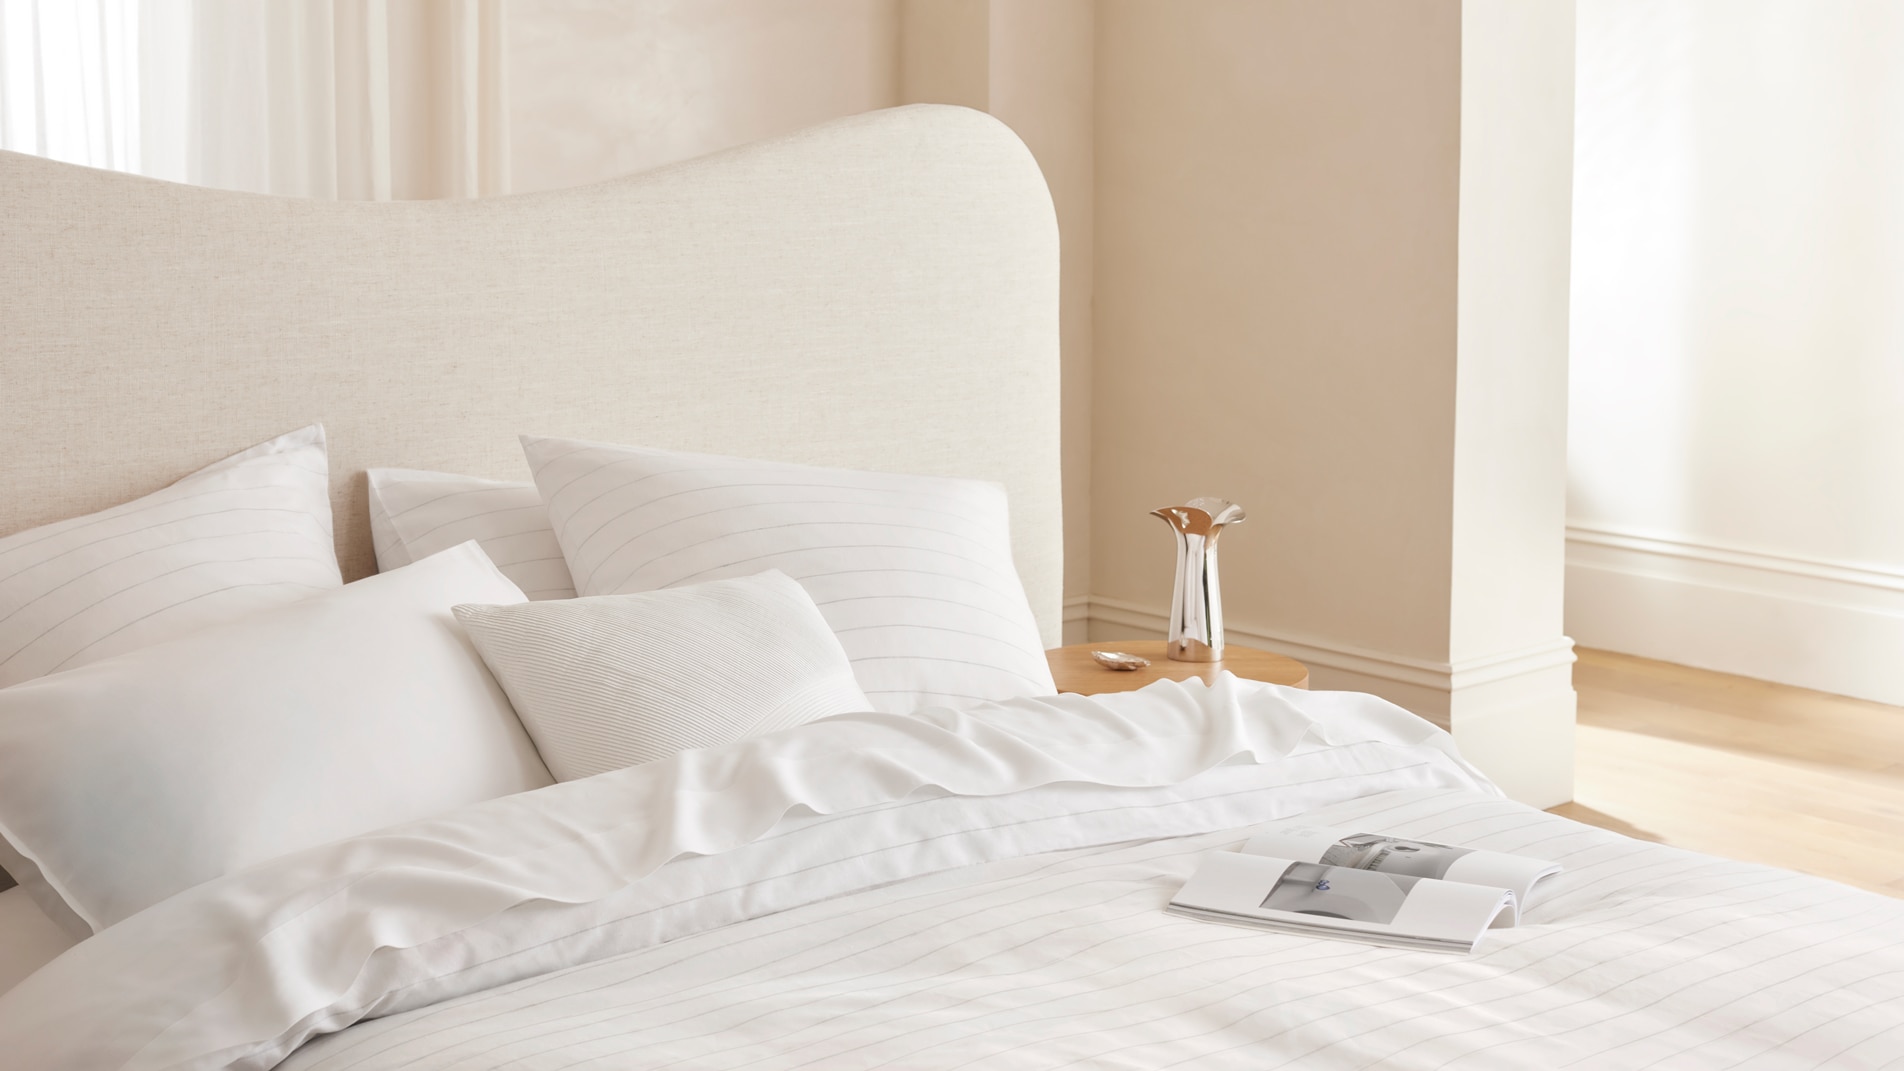 A close up of a bed with all white bed linen and a magazine sitting on top. In the background a silver vase sits on a round timber table.